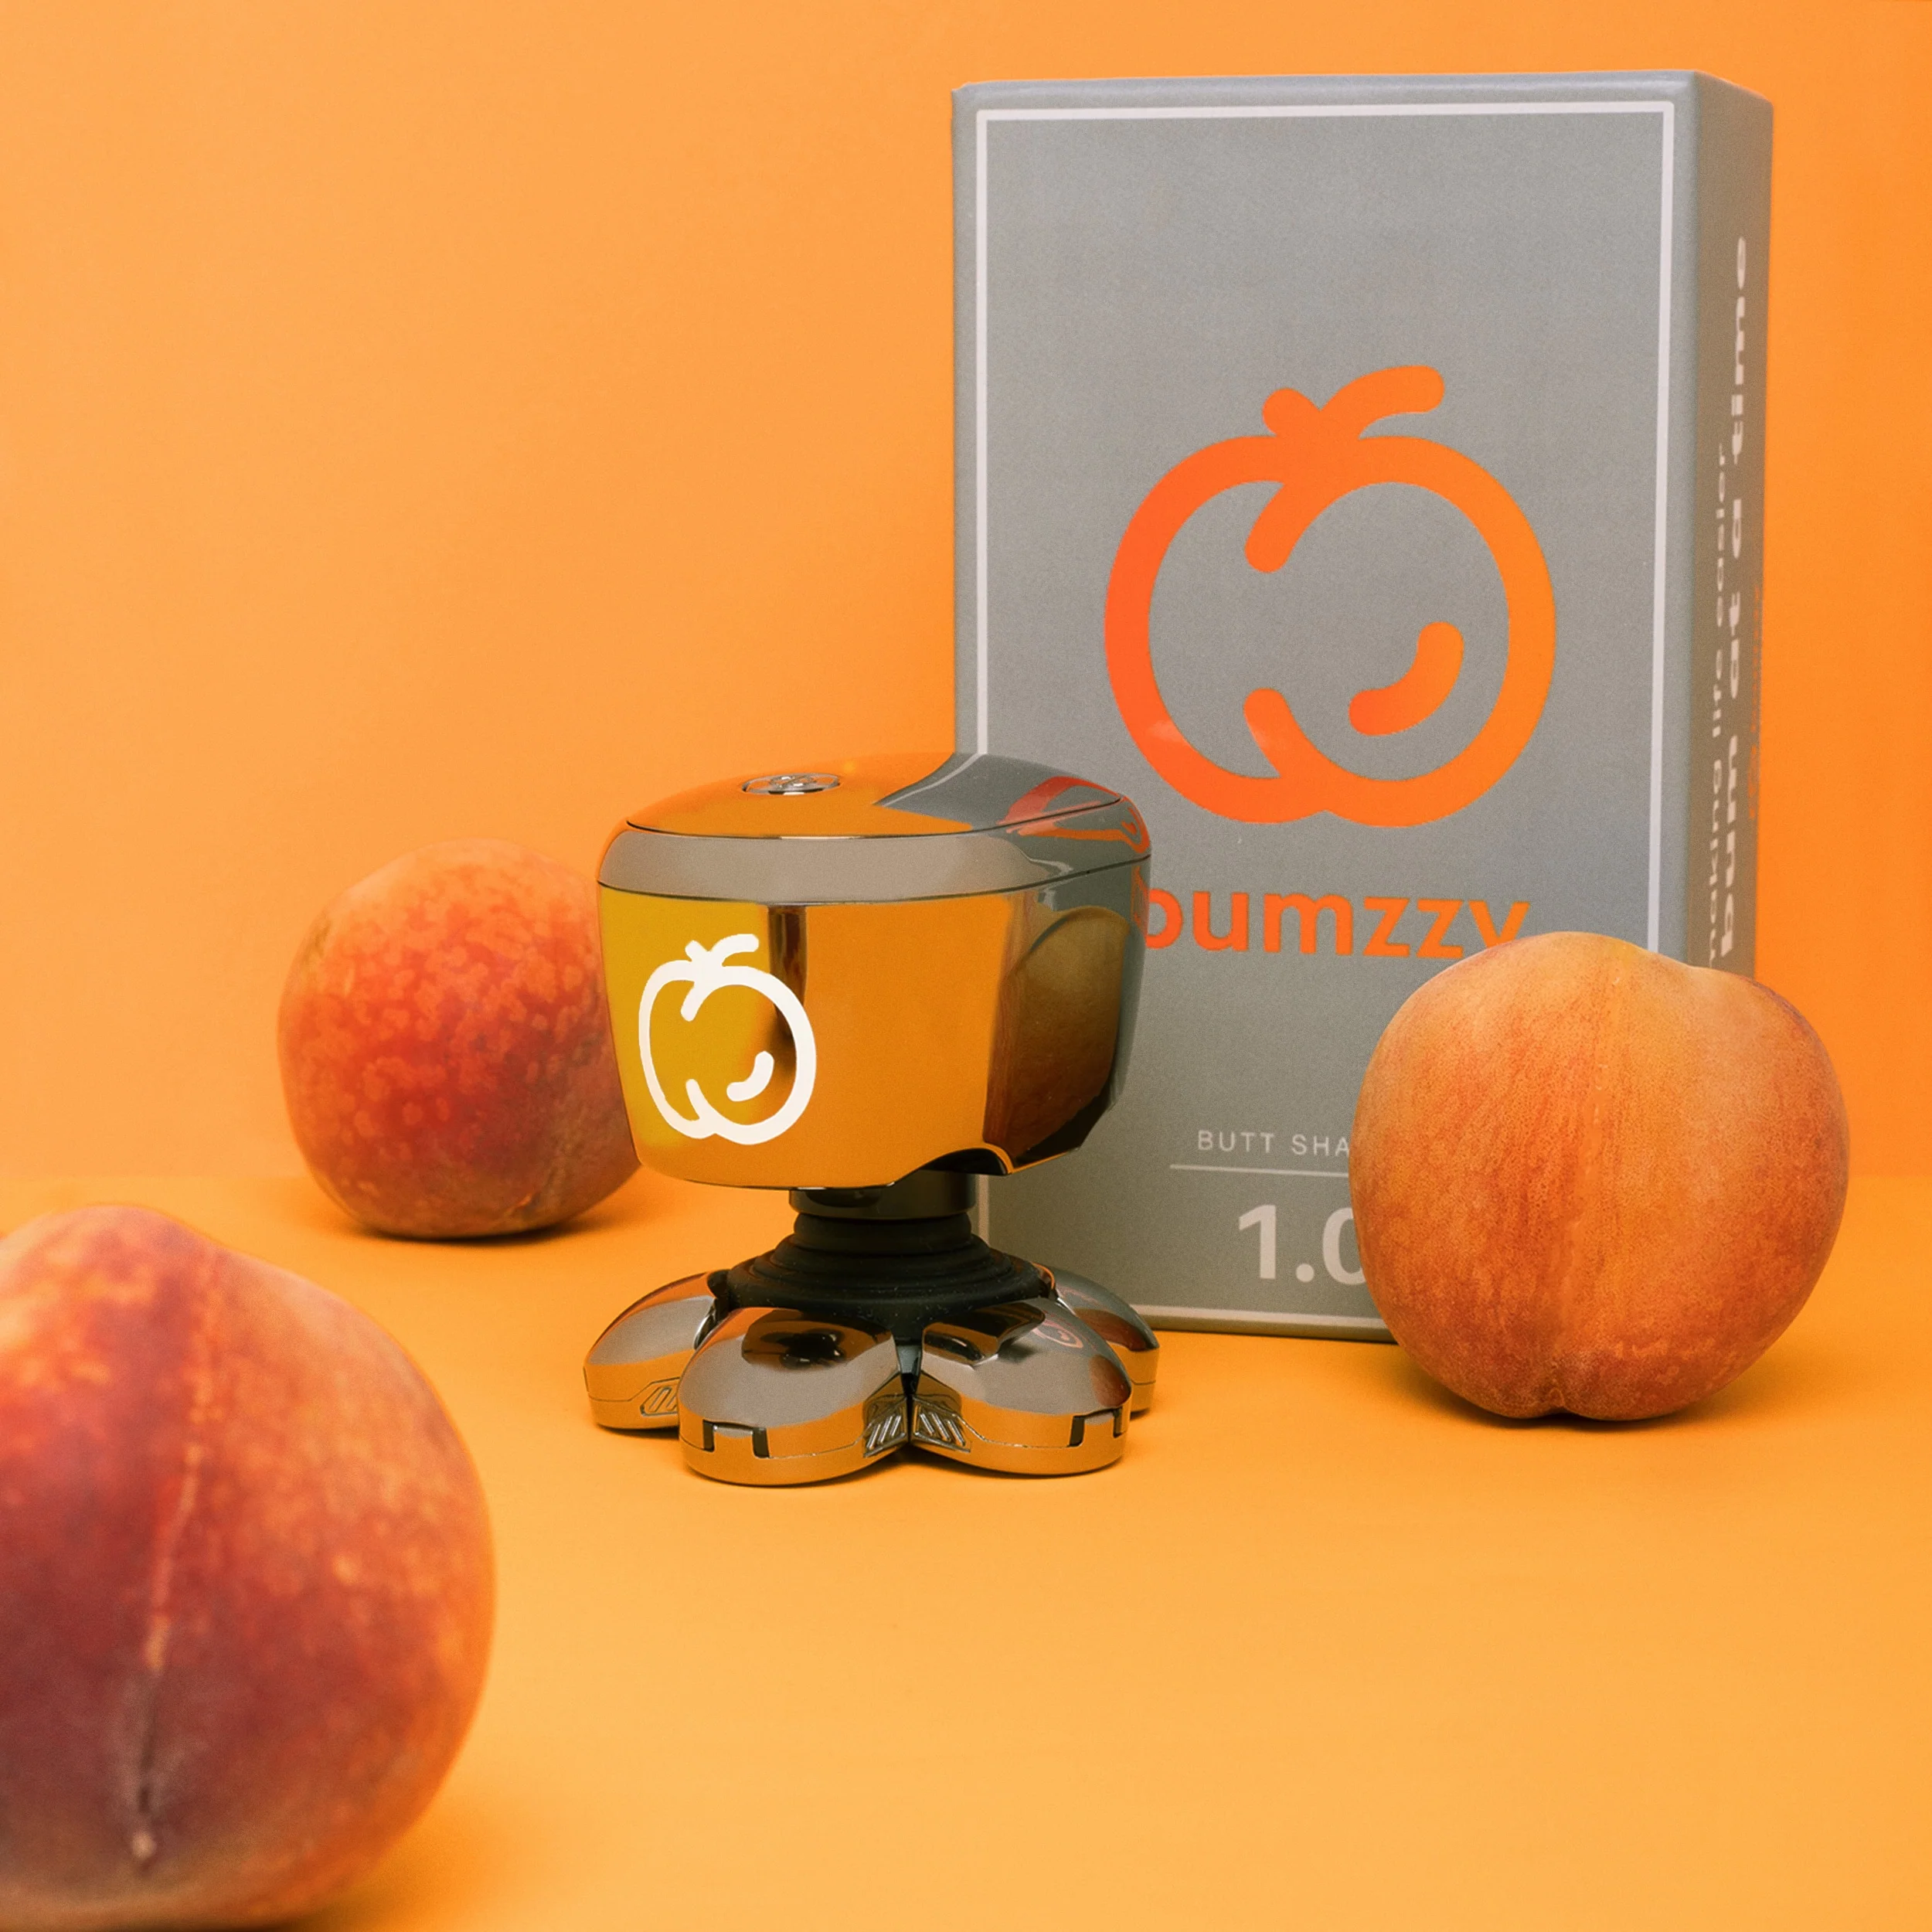 Shaving Your Peach Made Easy with Bumzzy!